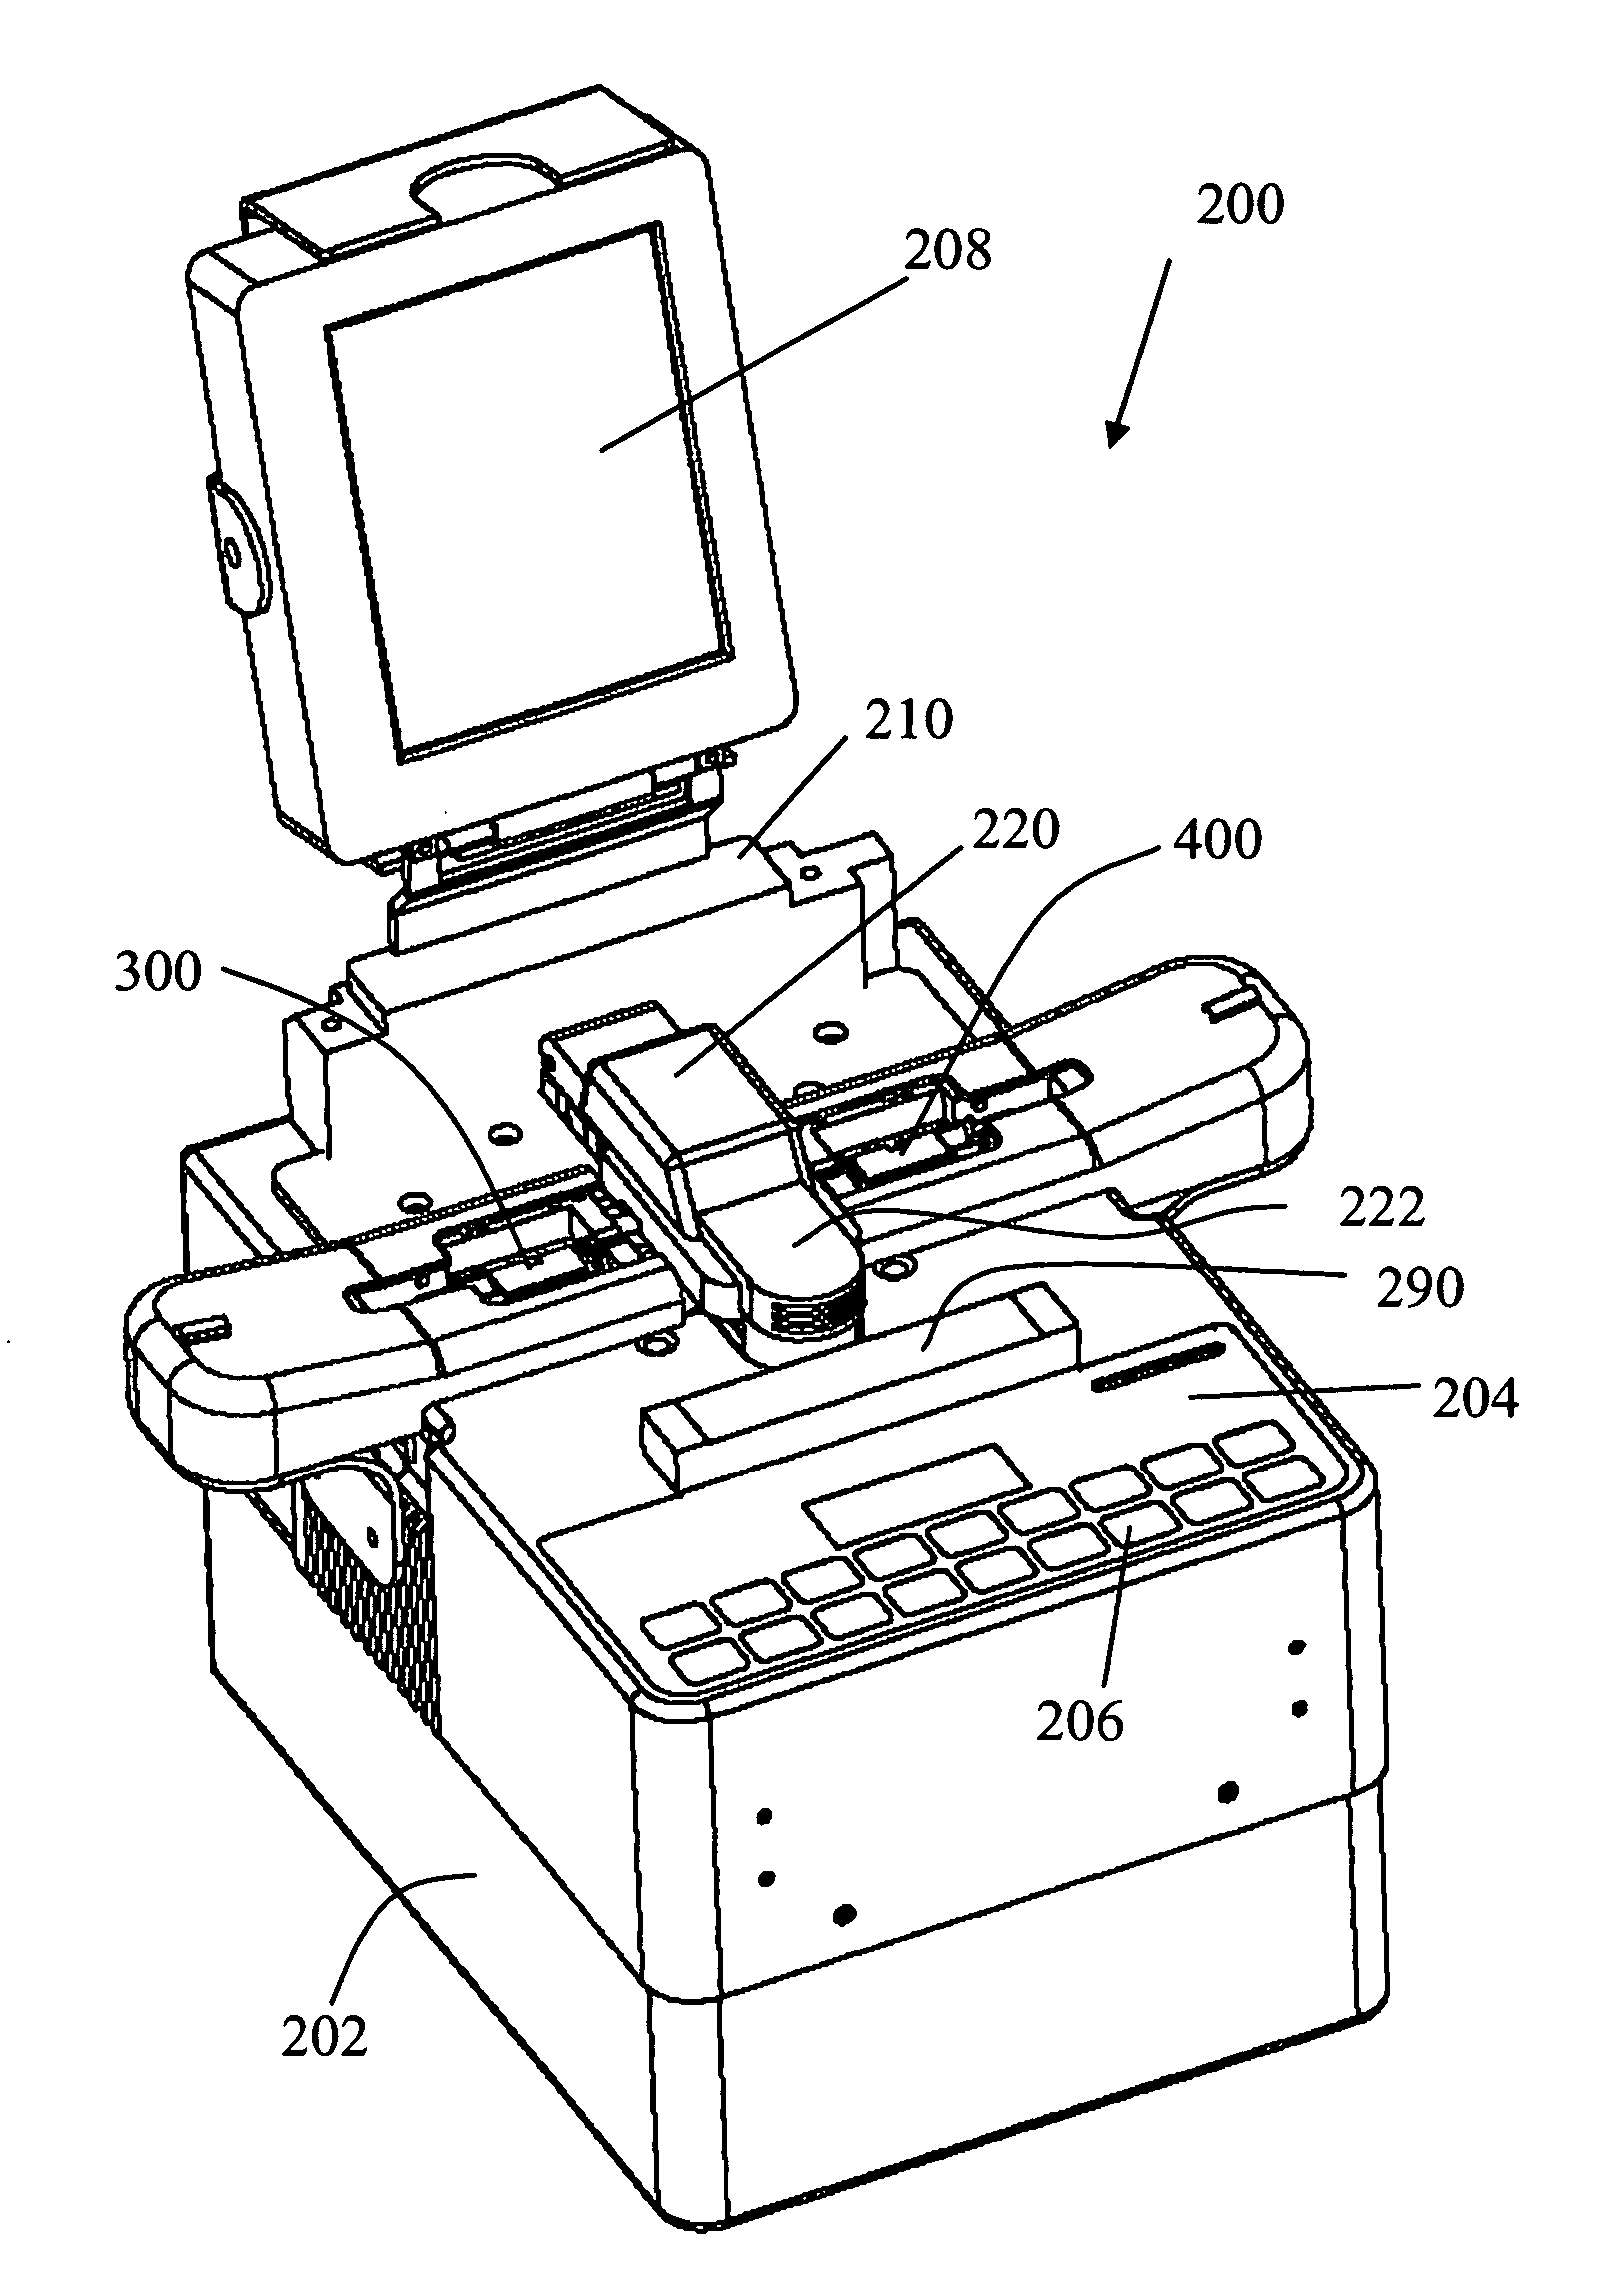 System for joining polarization-maintaining optical fiber waveguides